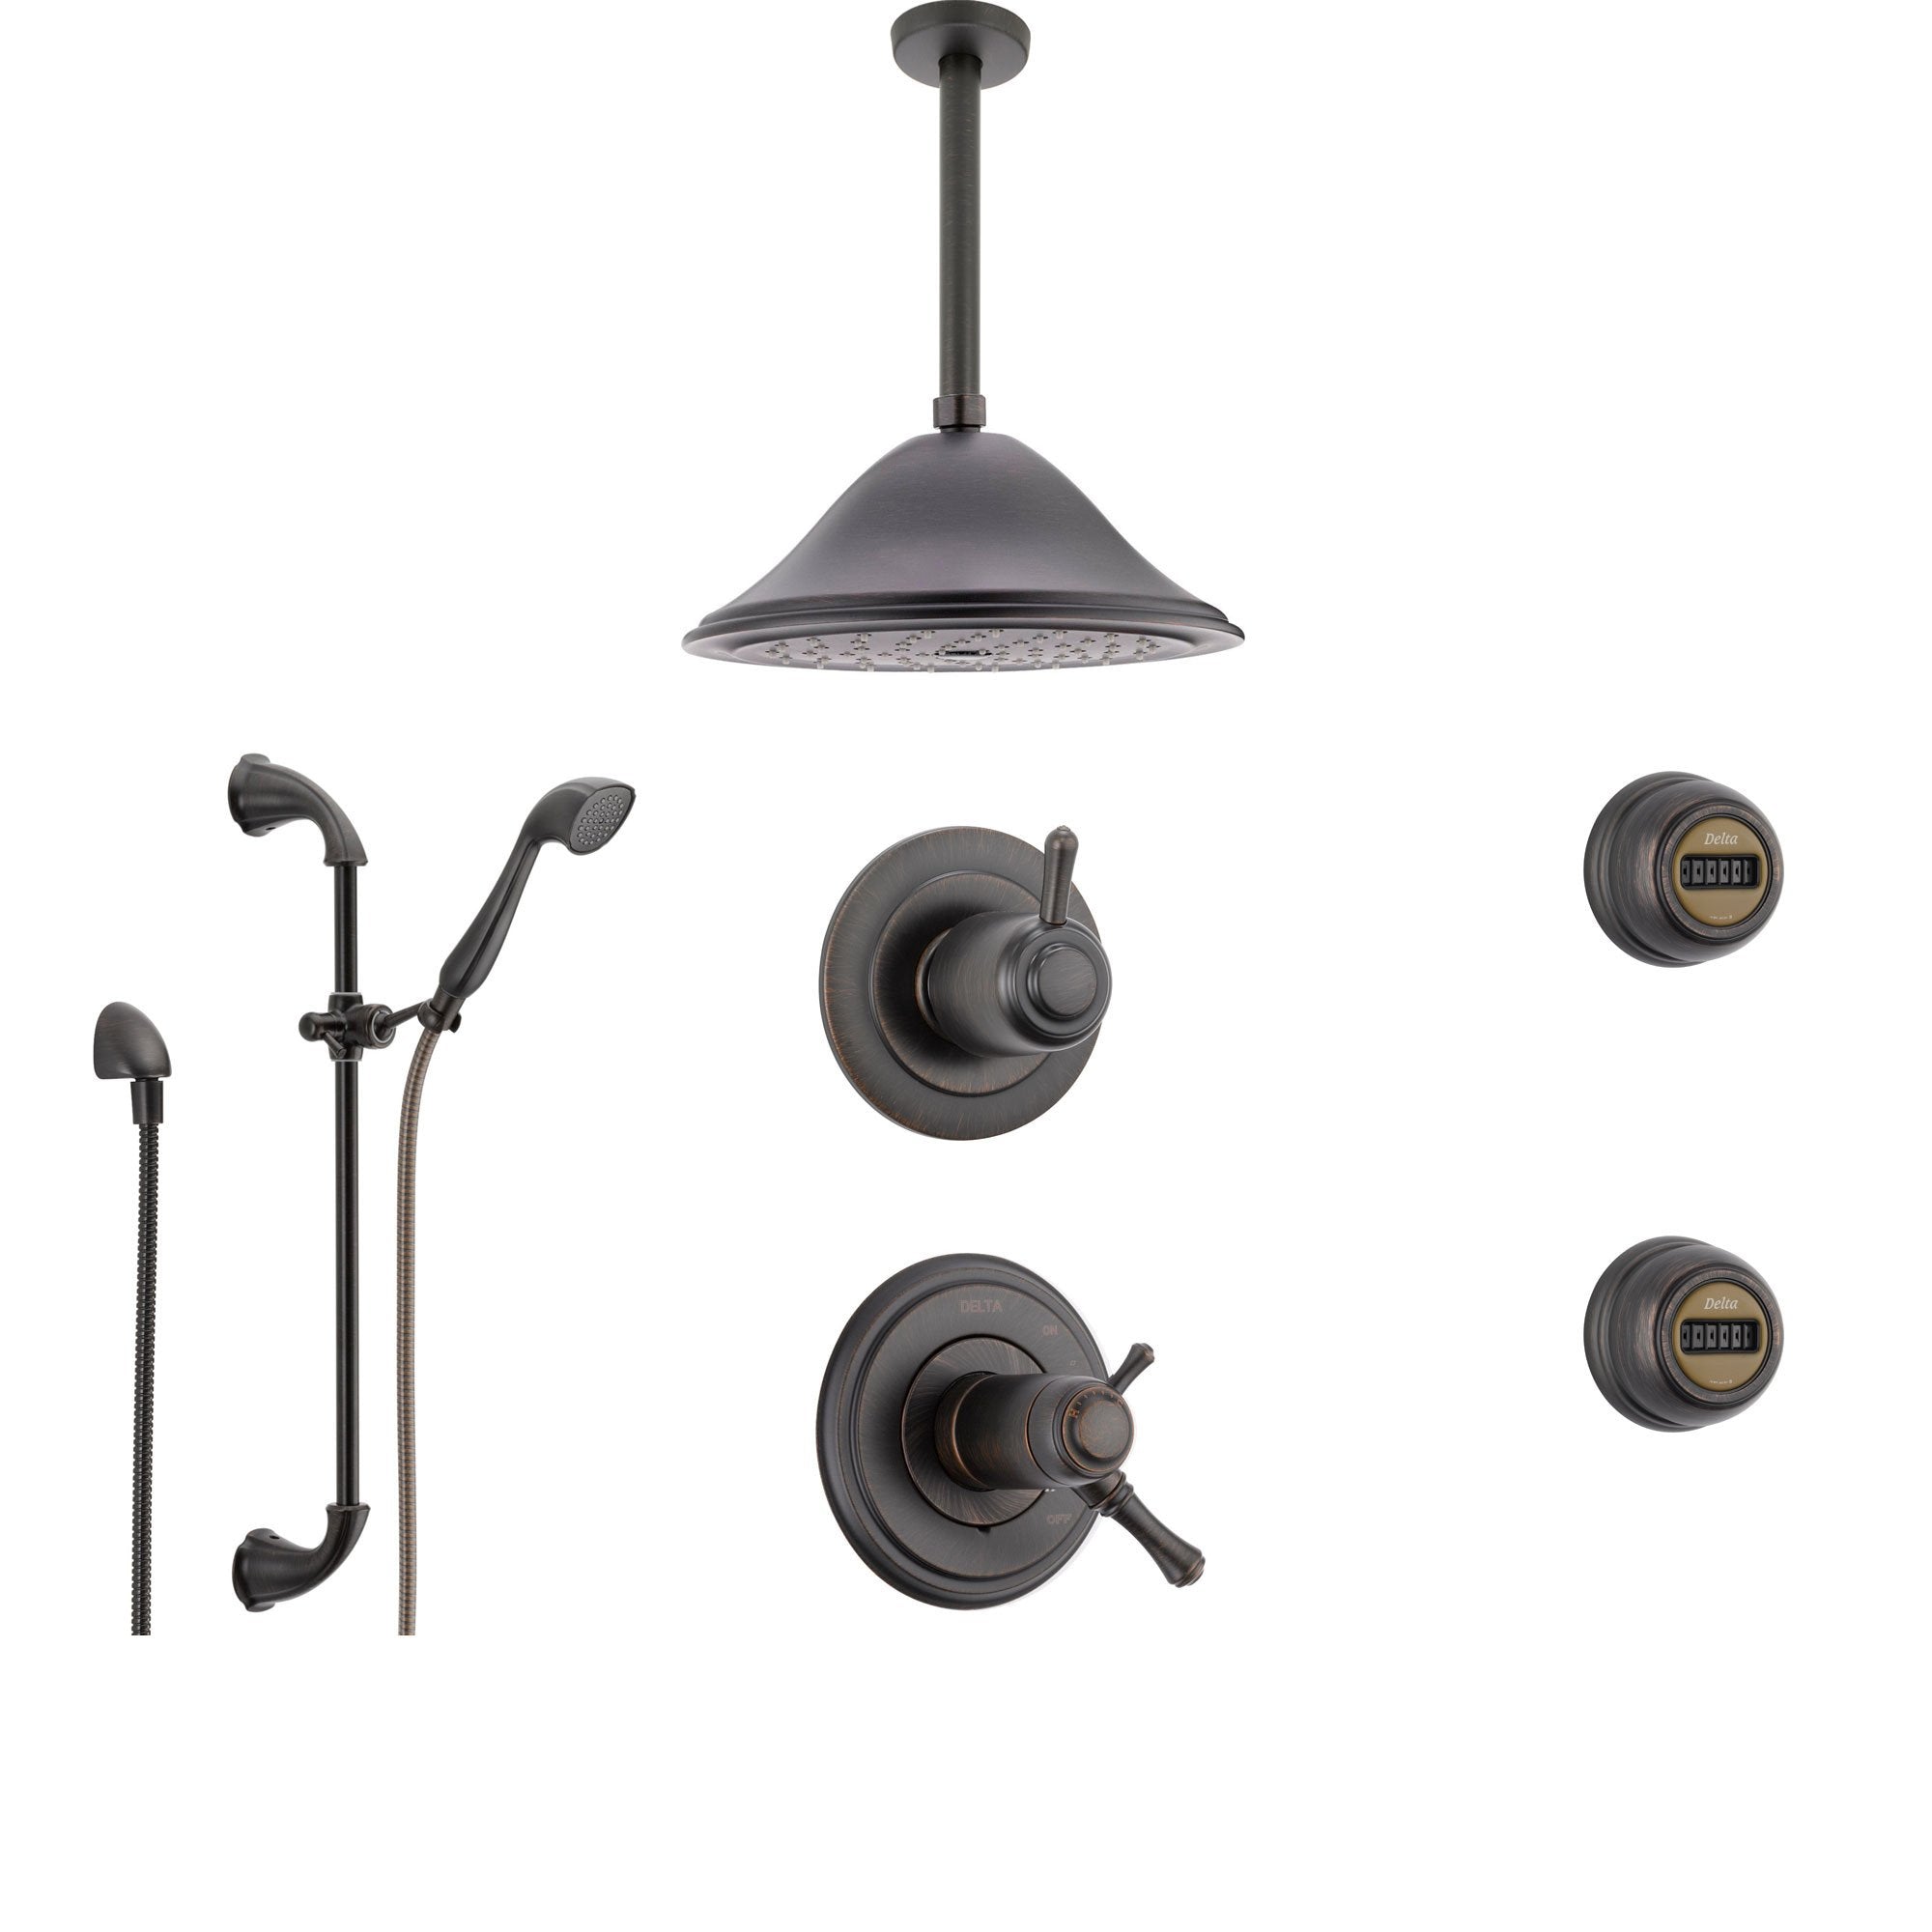 Delta Cassidy Venetian Bronze Shower System with Thermostatic Shower Handle, 6-setting Diverter, Large Rain Showerhead, Handheld Shower, and 2 Body Sprays SS17T9795RB